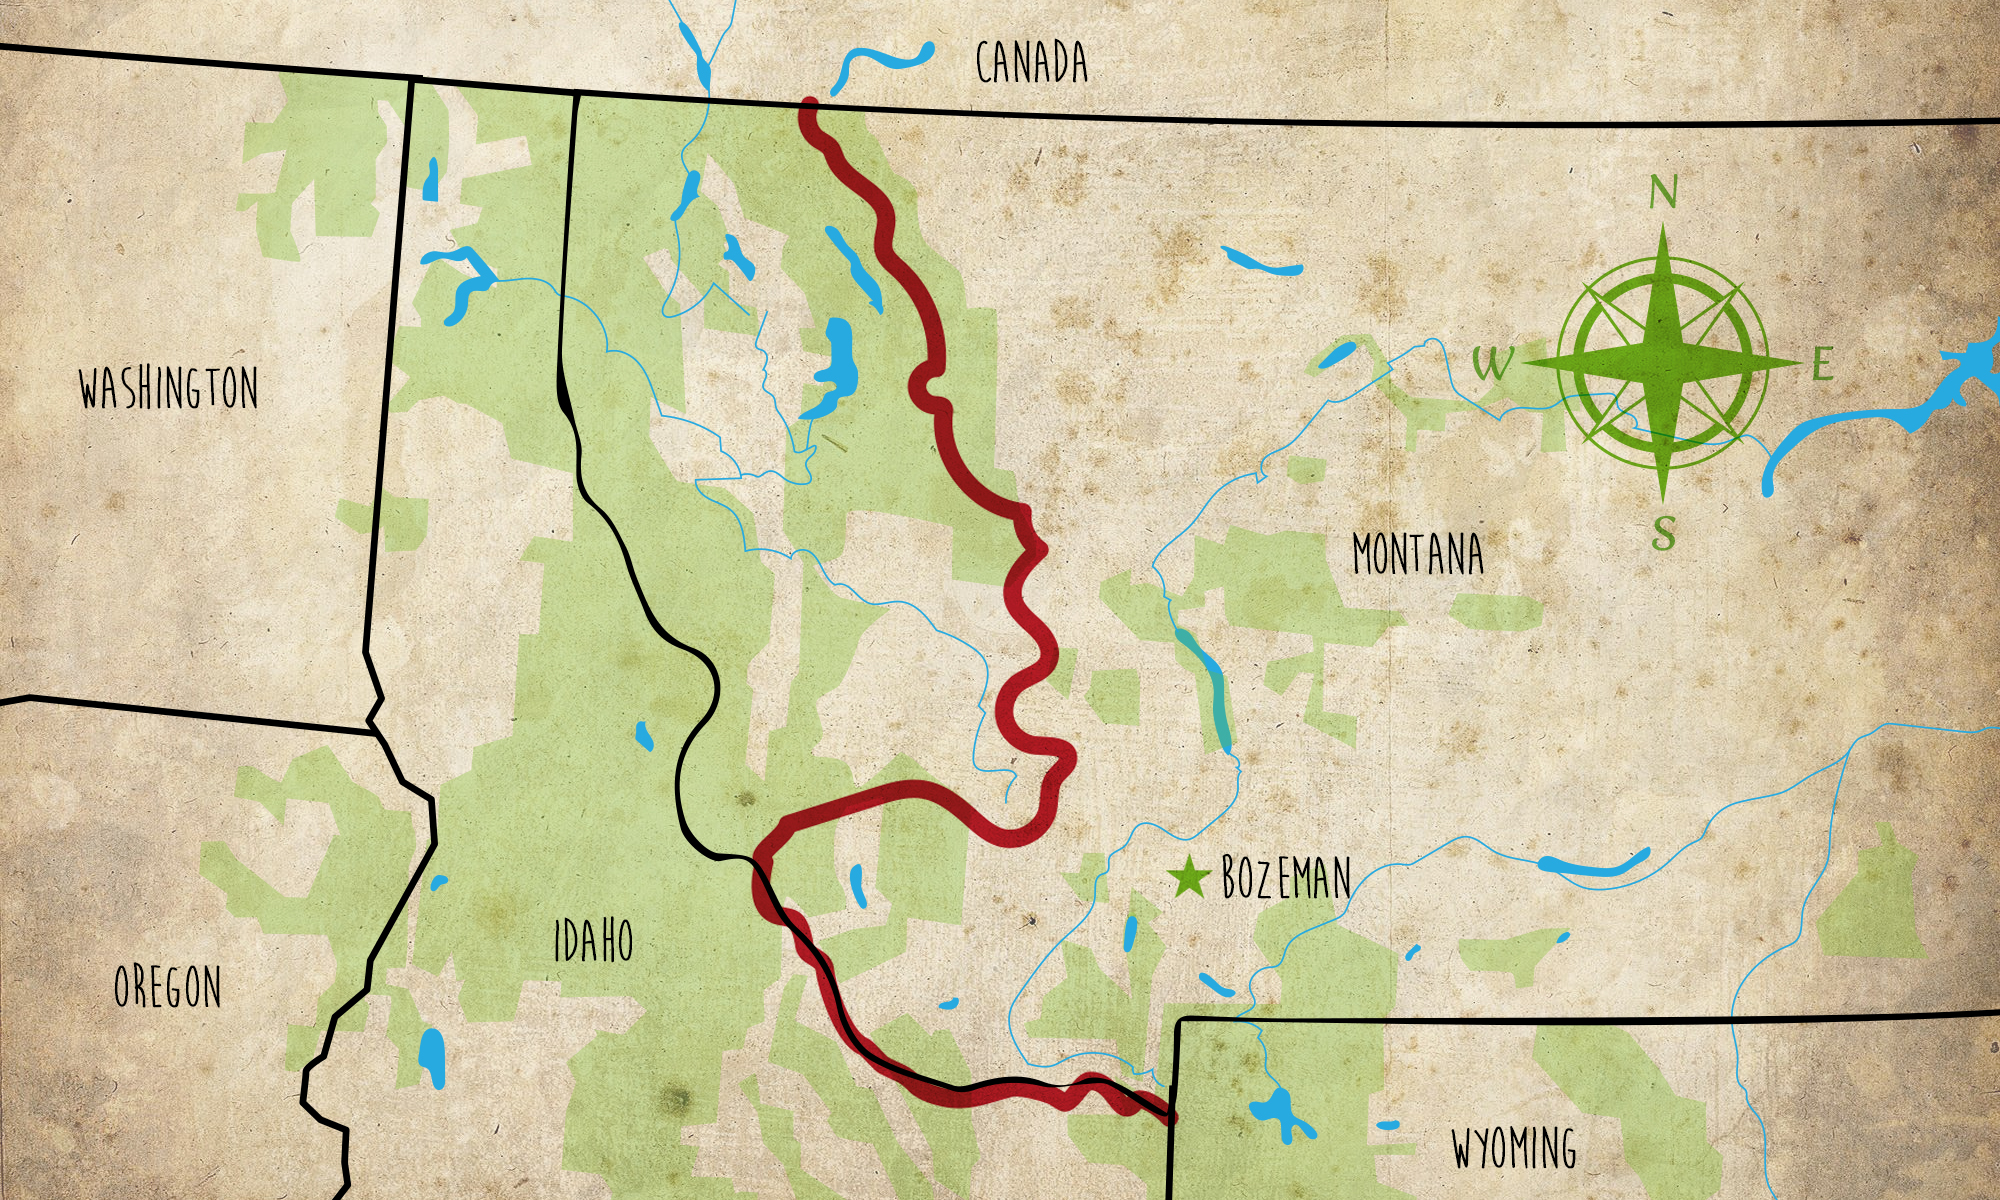 Mapped route of the Continental Divide Trail over Montana.